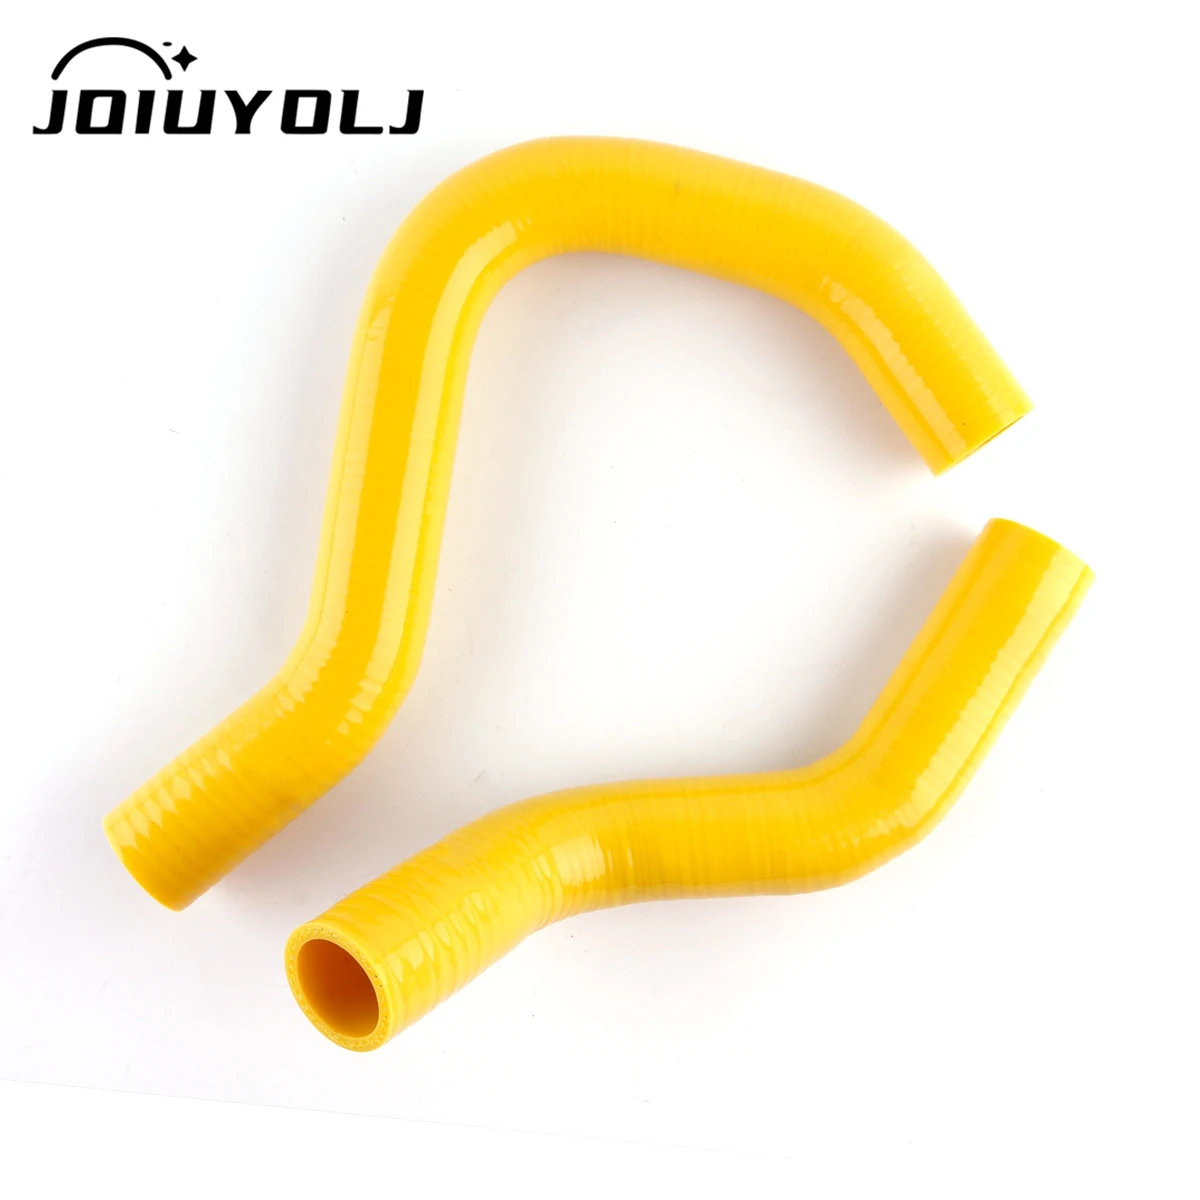 

For Honda Civic Si SiR TYPE R EP3 K20A 2001 2002 2003 2004 2005 Silicone Radiator Coolant Hose Kit